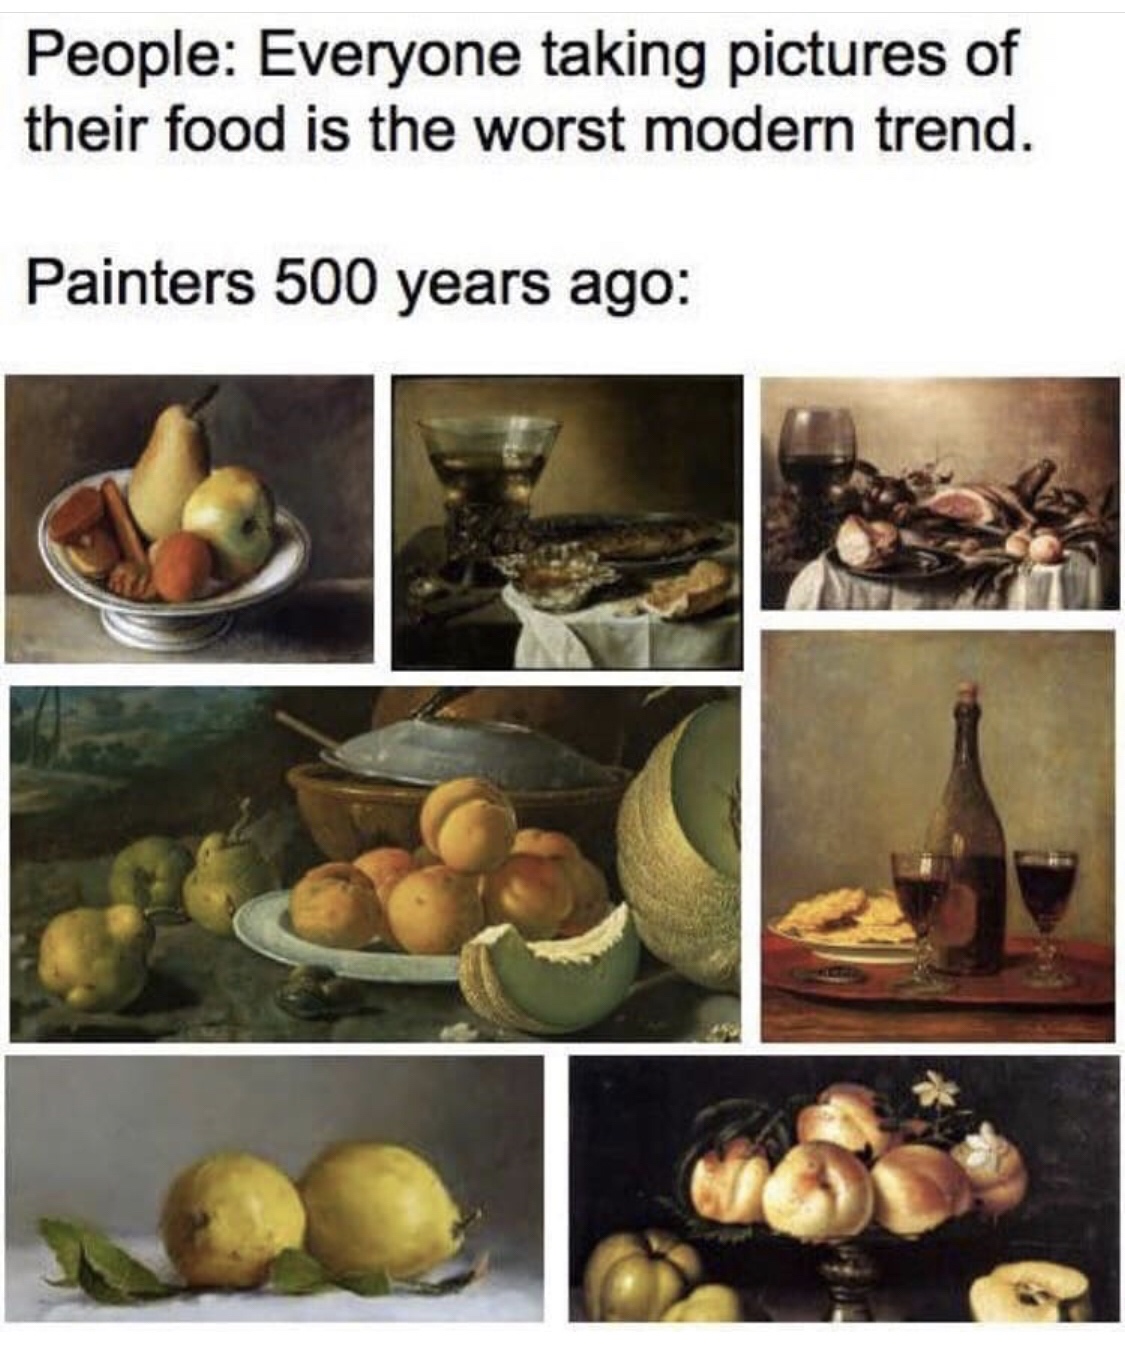 everyone taking pictures of their food - People Everyone taking pictures of their food is the worst modern trend. Painters 500 years ago